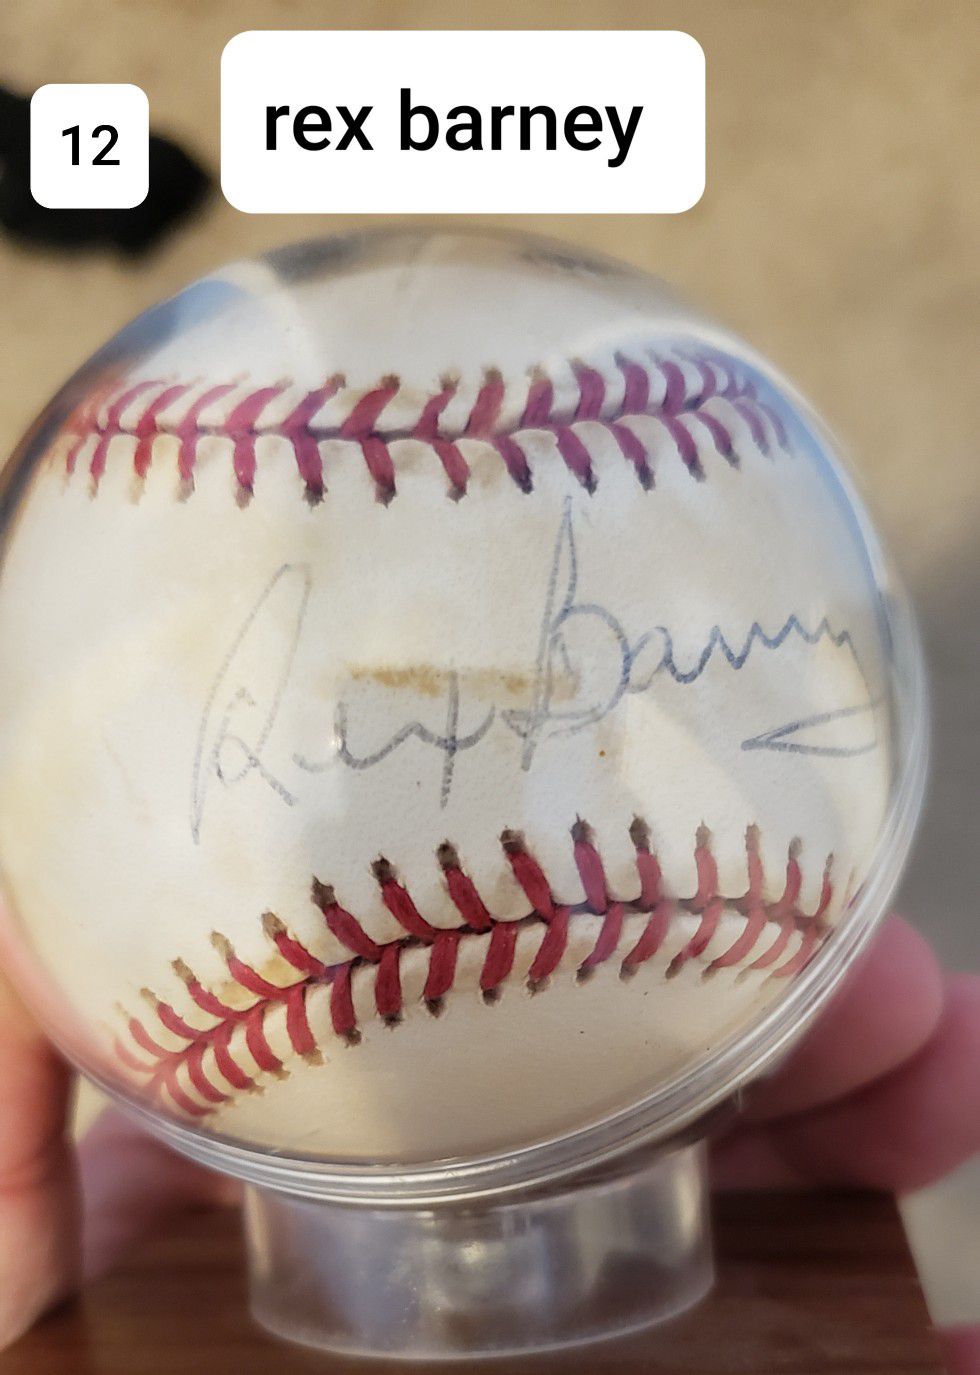 Autographs baseball by rex barney and chris Hoiles